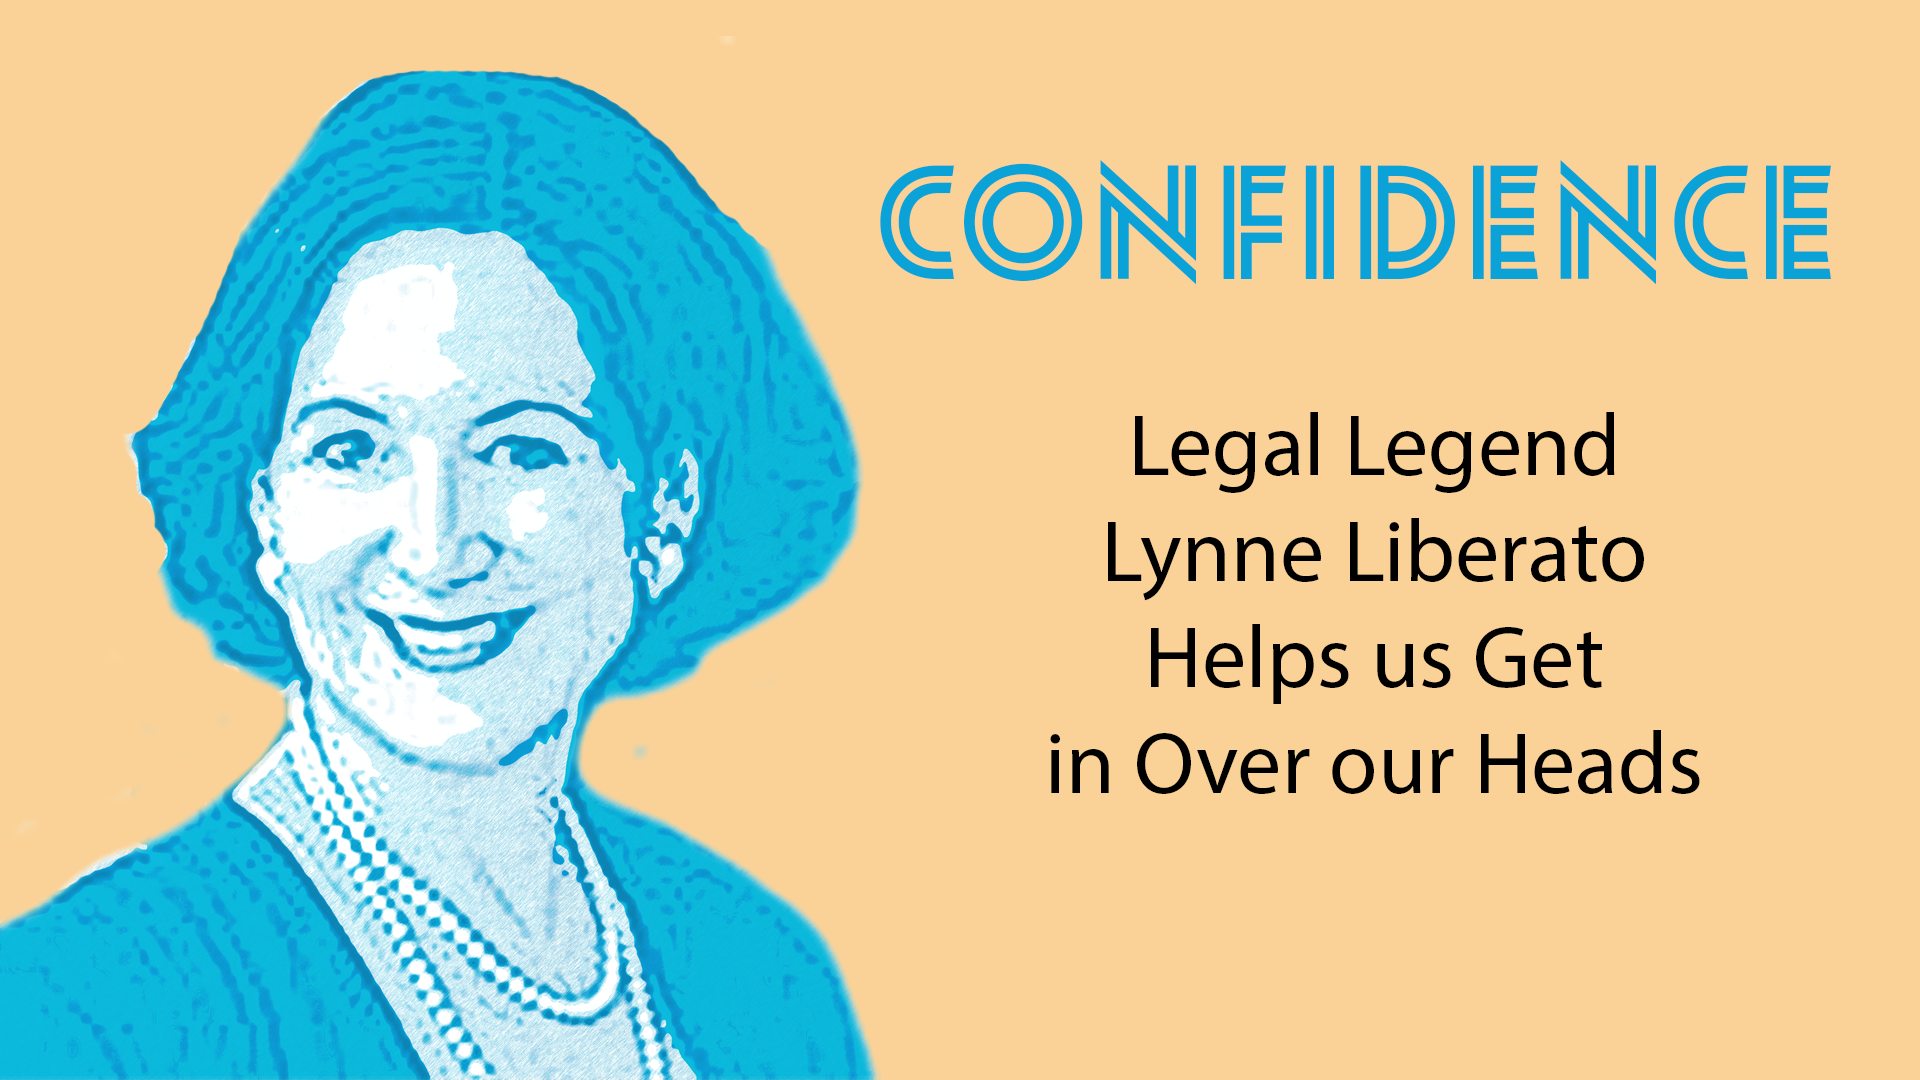 Confidence: Legal Legend Lynne Liberato Helps us Get in Over our Heads